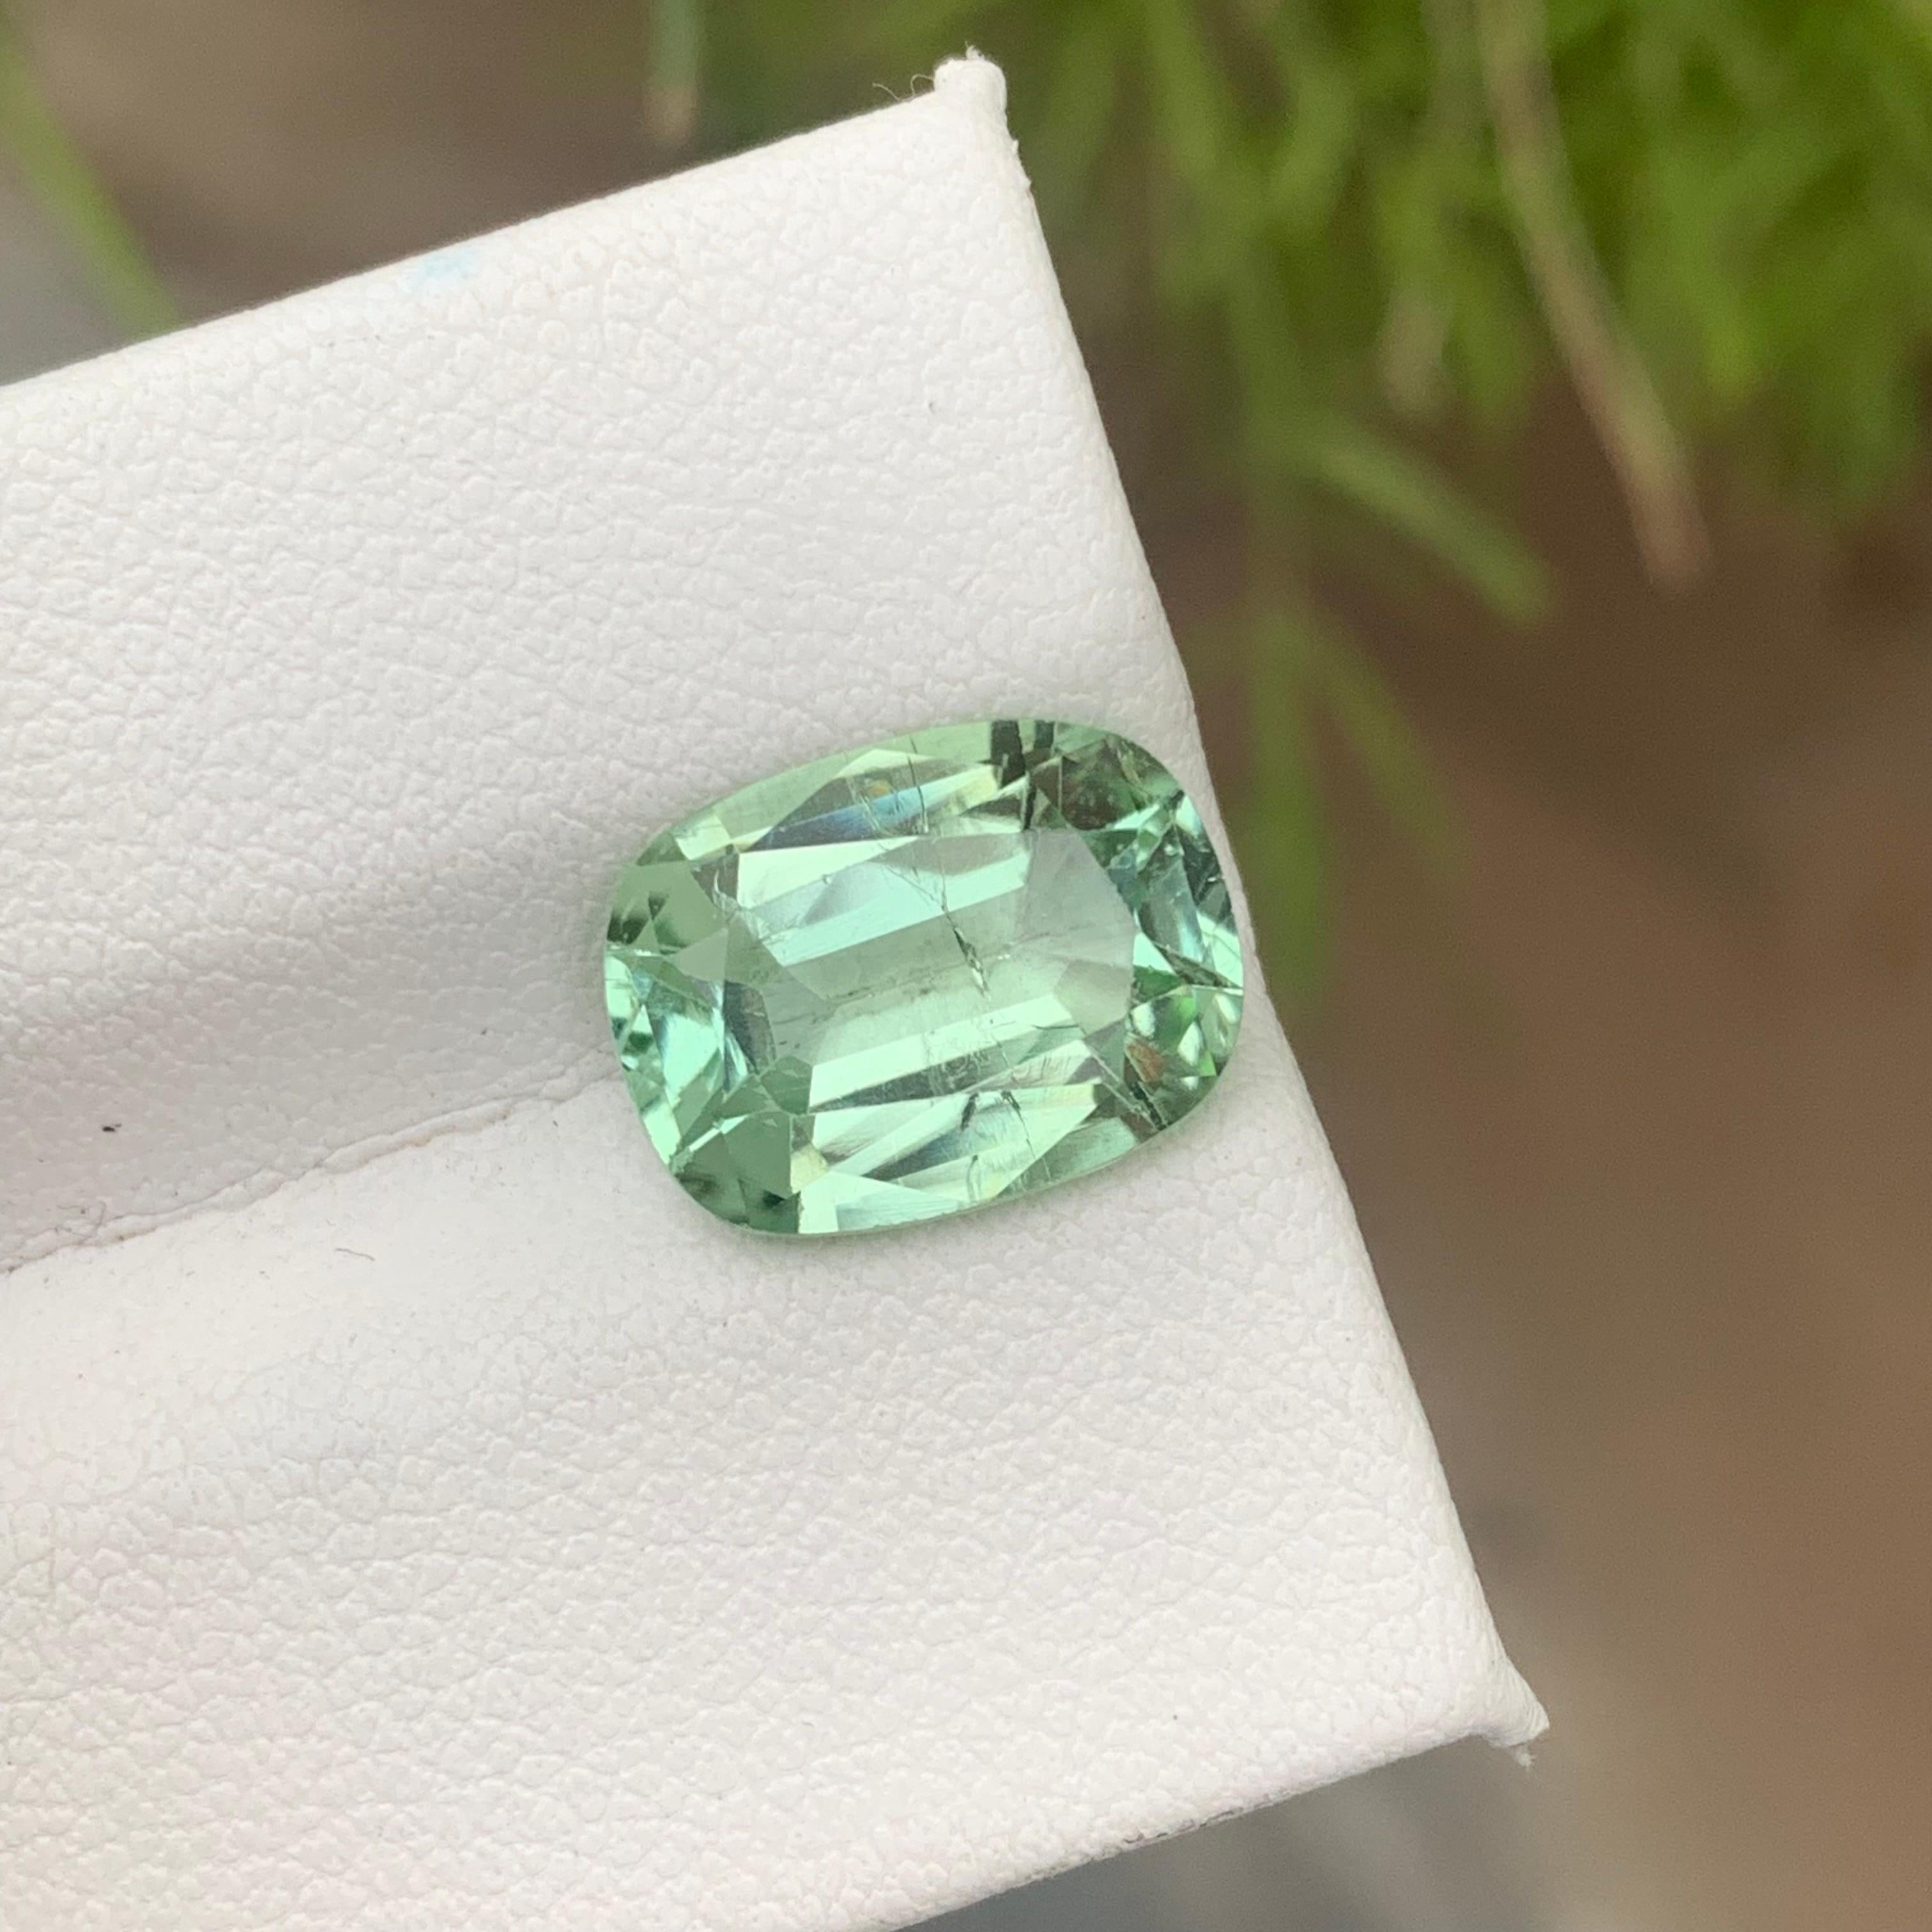 Gemstone Type : Tourmaline
Weight : 4.50 Carats
Dimensions : 12.2x9.1x5.7 Mm
Origin : Kunar Afghanistan
Clarity : SI
Shape: Cushion
Color: Mint Green
Certificate: On Demand
Basically, mint tourmalines are tourmalines with pastel hues of light green